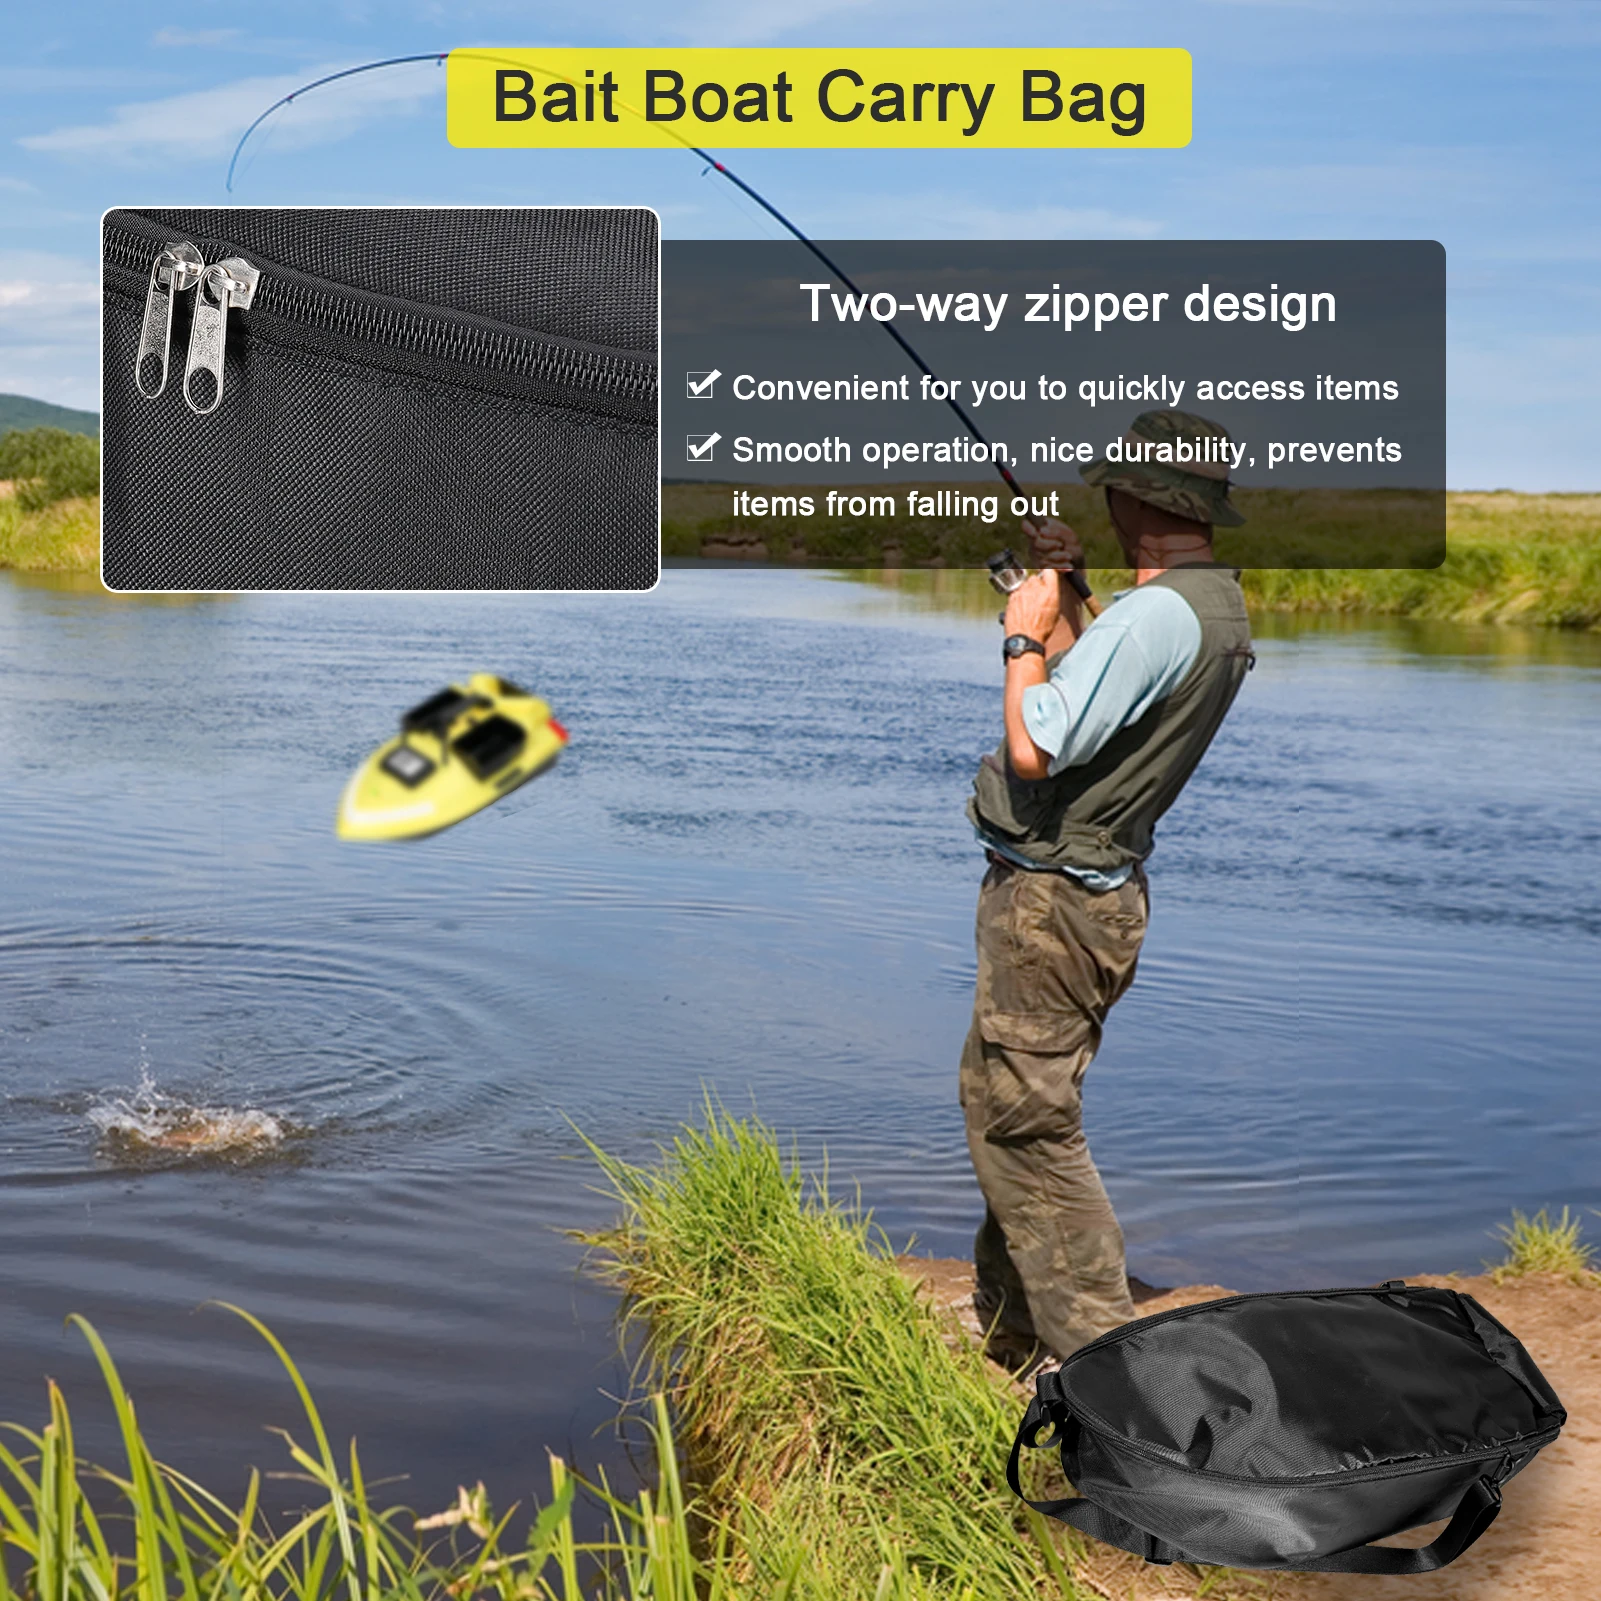 https://ae01.alicdn.com/kf/S4da86e013f094689a974c92097cecb053/Carry-Bag-for-Fishing-Bait-Boat-Wear-Resistant-Oxford-Fabric-Storage-Bag-Handbag-with-Side-Pouch.jpg